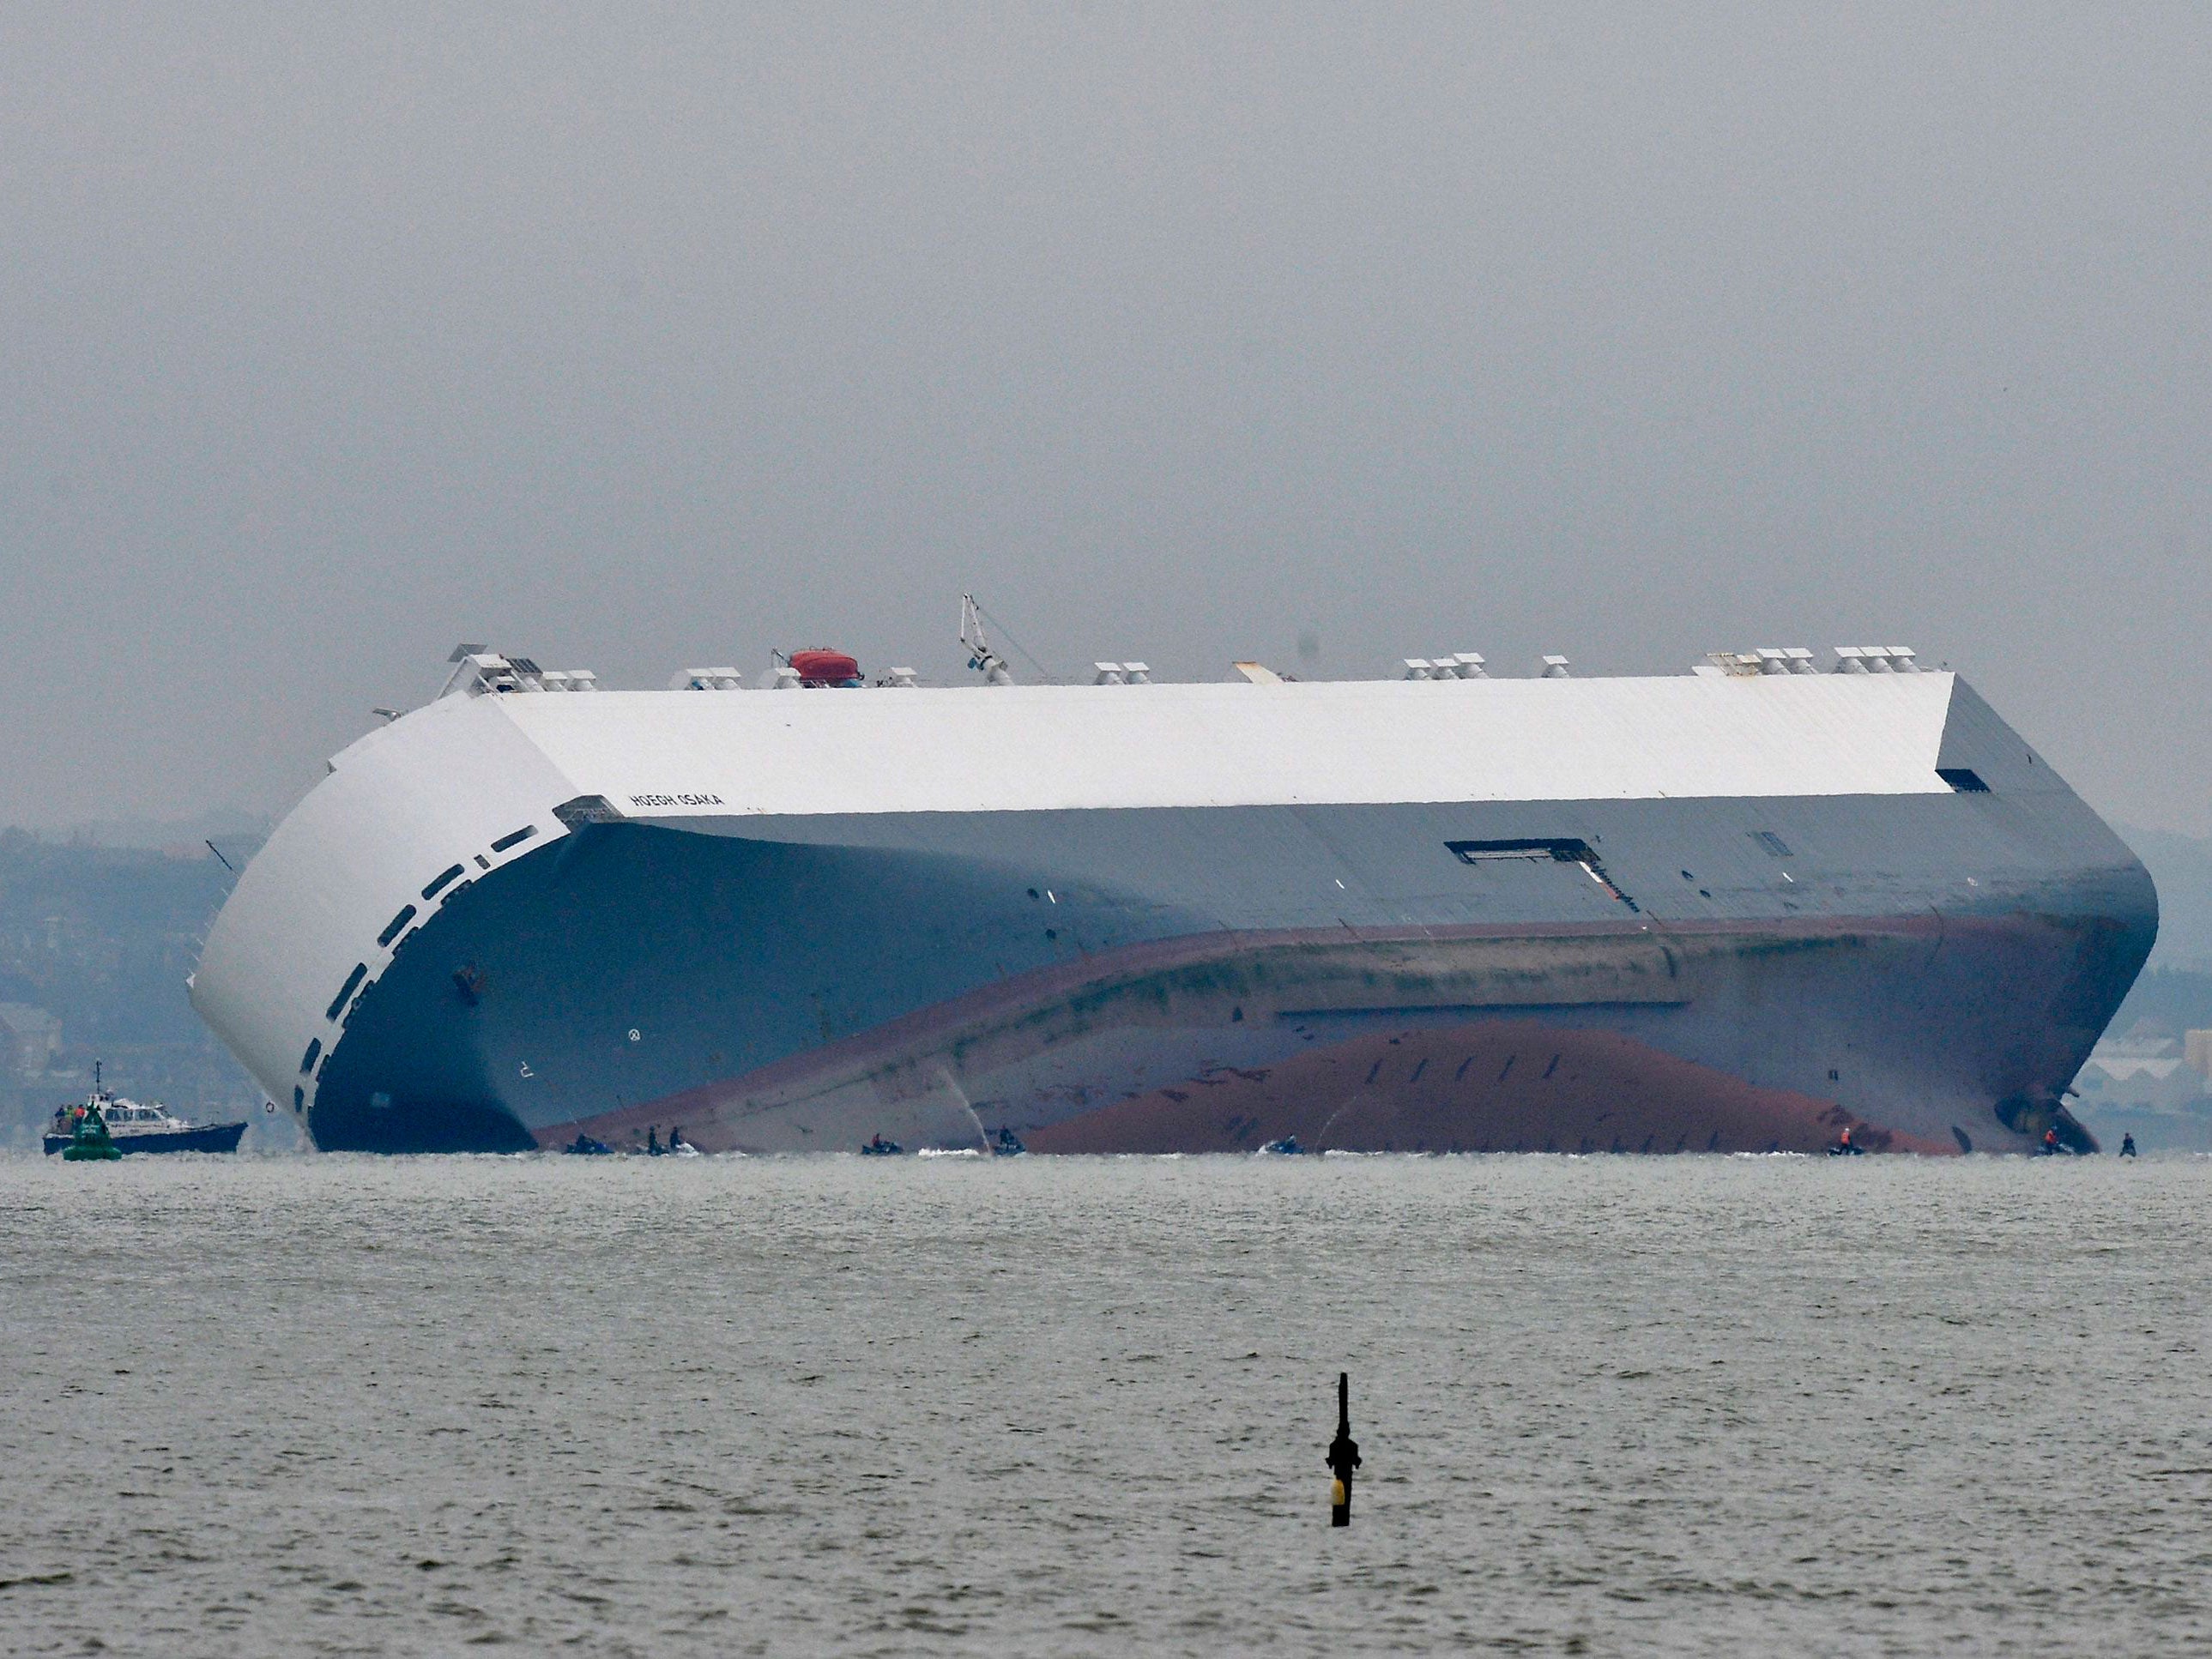 The Hoegh Osaka, a car carrier, is seen from Calshot in Hampshire after the ship became stranded on Bramble Bank, in the Solent between Southampton and the Isle of Wight